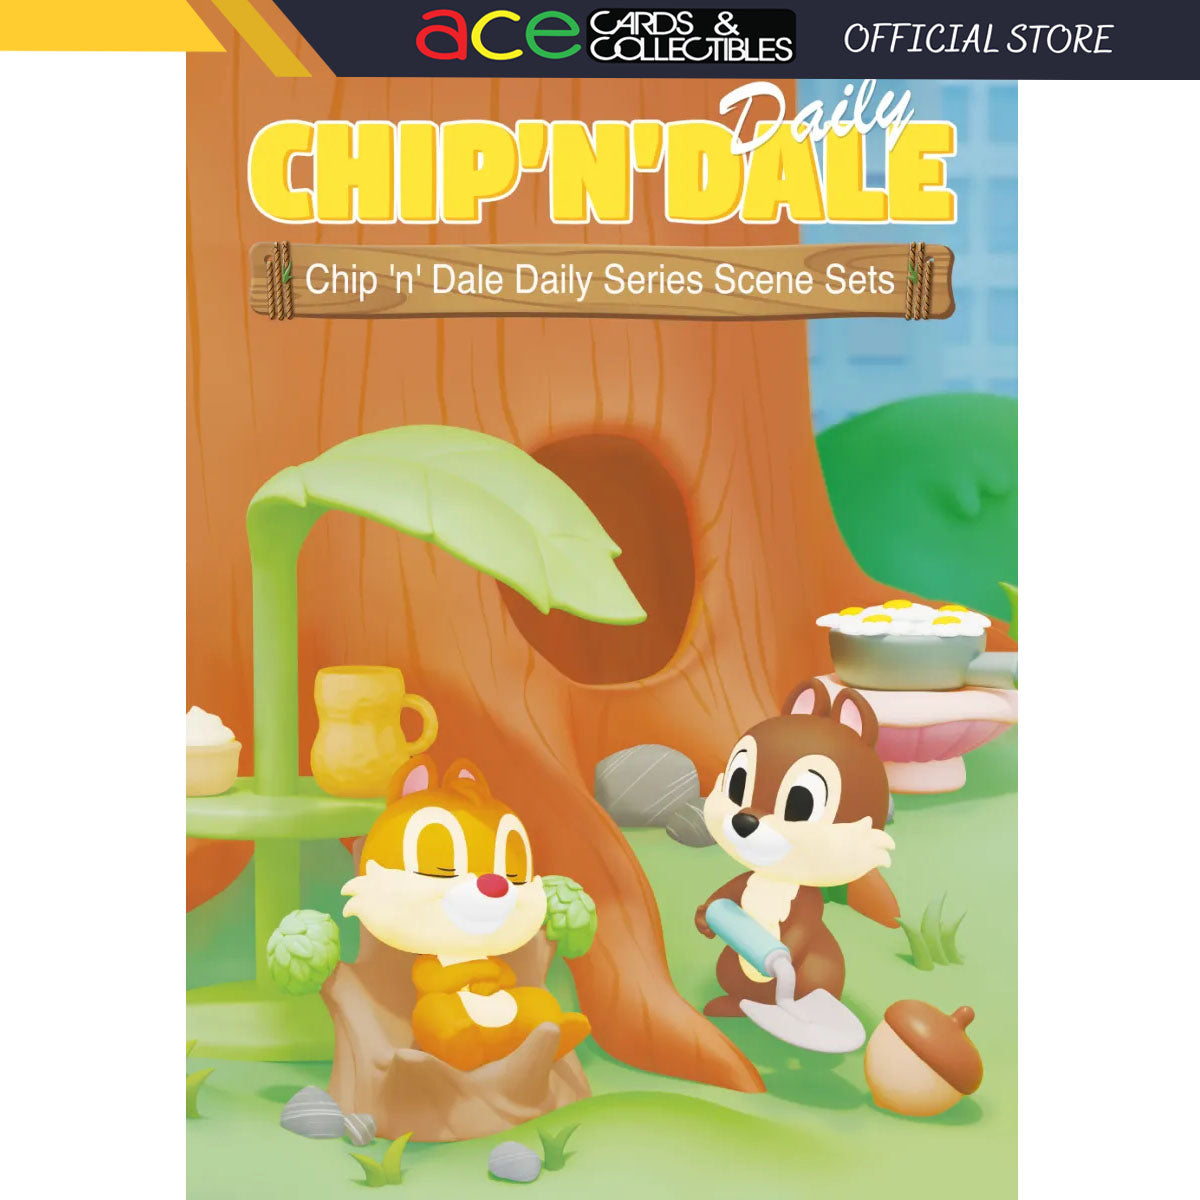 POP MART Chip 'n' Dale Daily Series Scene Sets-Single Box (Random)-Pop Mart-Ace Cards & Collectibles